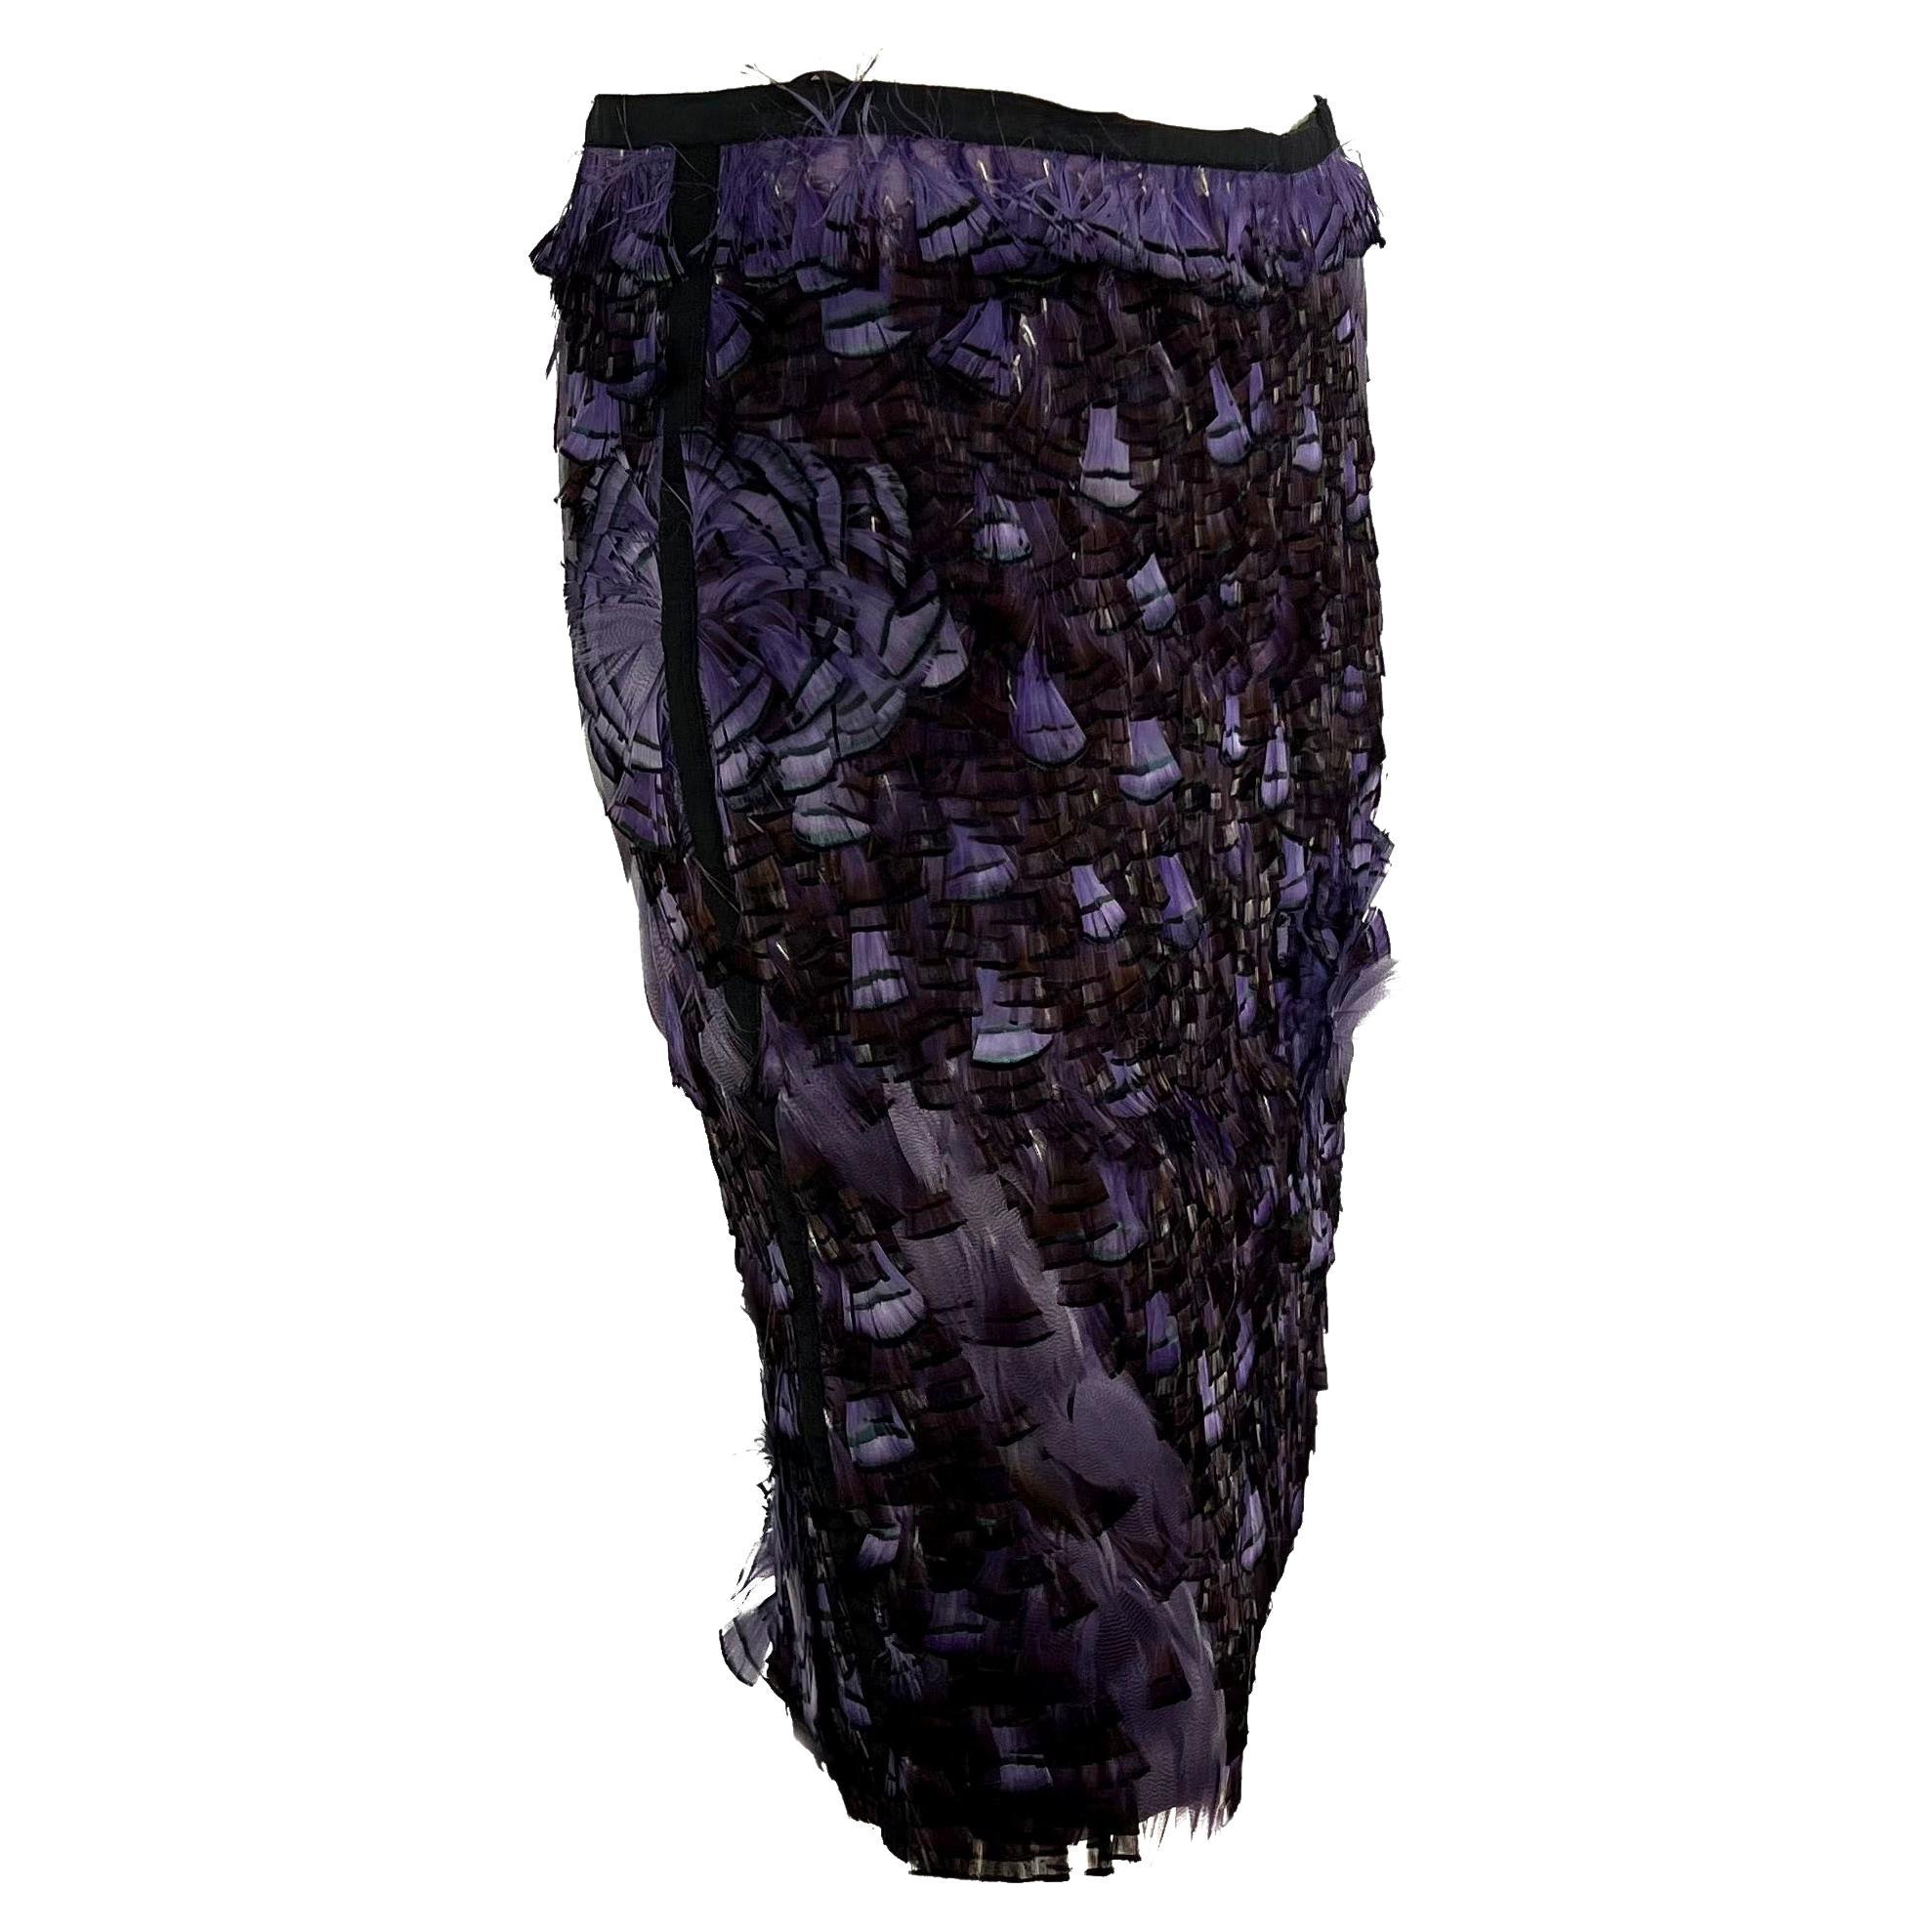 S/S 2003 Gucci by Tom Ford Purple Feather Embellished Silk Skirt  In Good Condition For Sale In West Hollywood, CA